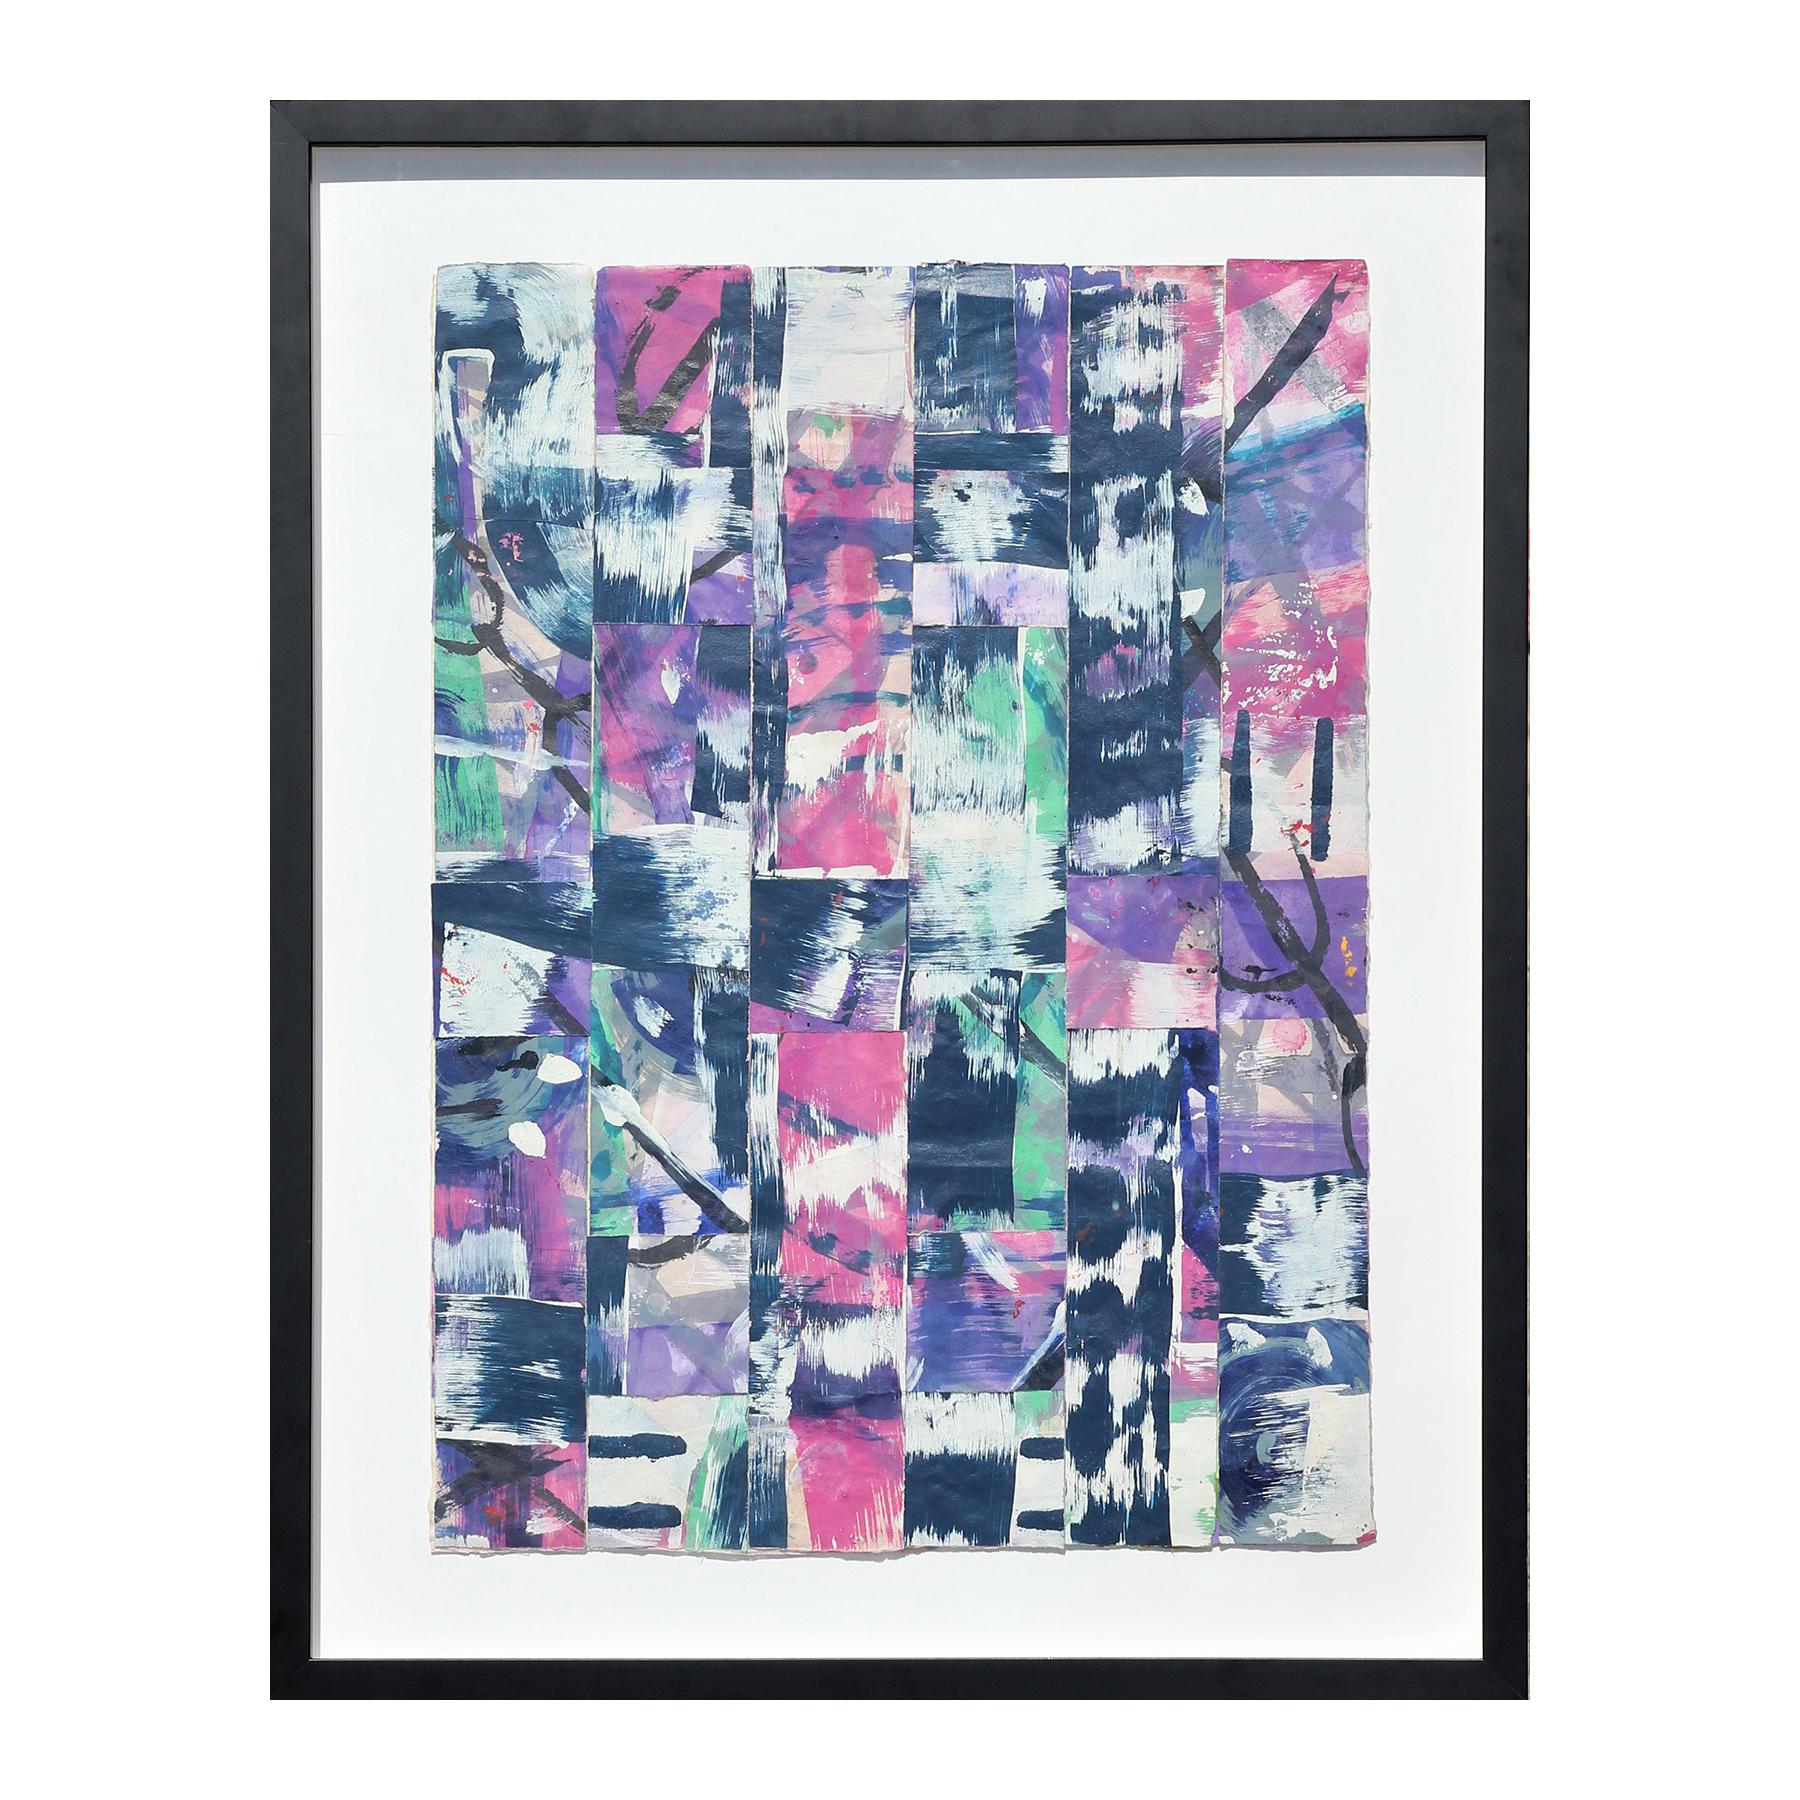 Untitled Abstract Contemporary Gestural Pink & Purple Woven Mixed Media Painting - Mixed Media Art by Ibsen Espada